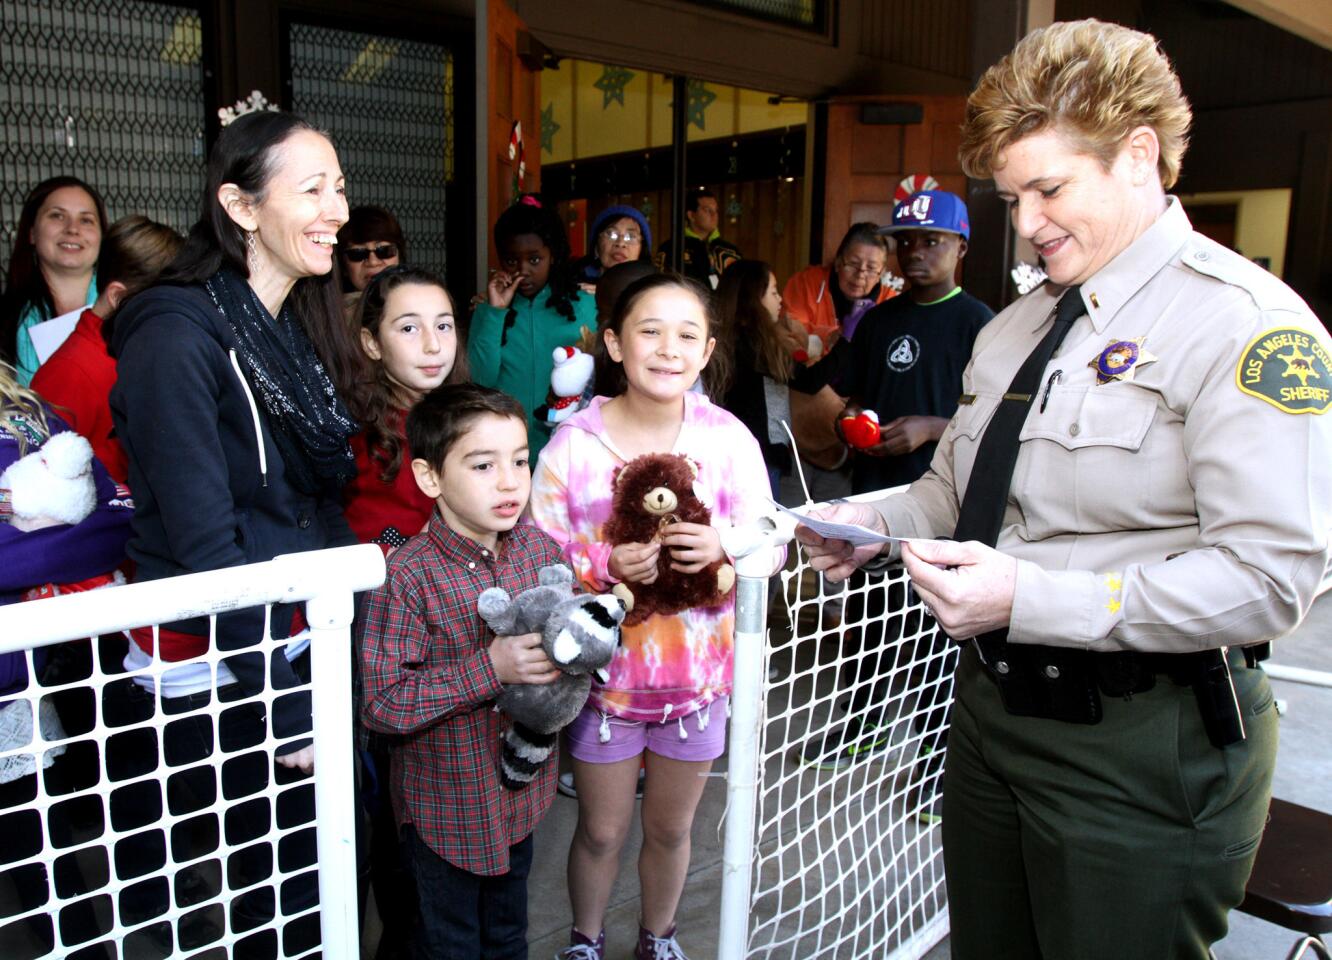 Los Angeles County Sheriff's Lt. Marjory Jacobs of the Crescenta Valley Station helps the Hill family pick out toys during the Crescenta Valley Sheriff Station's annual Toy and Food Drive at Crescenta Valley Park in La Crescenta on Saturday, Dec. 19, 2015.